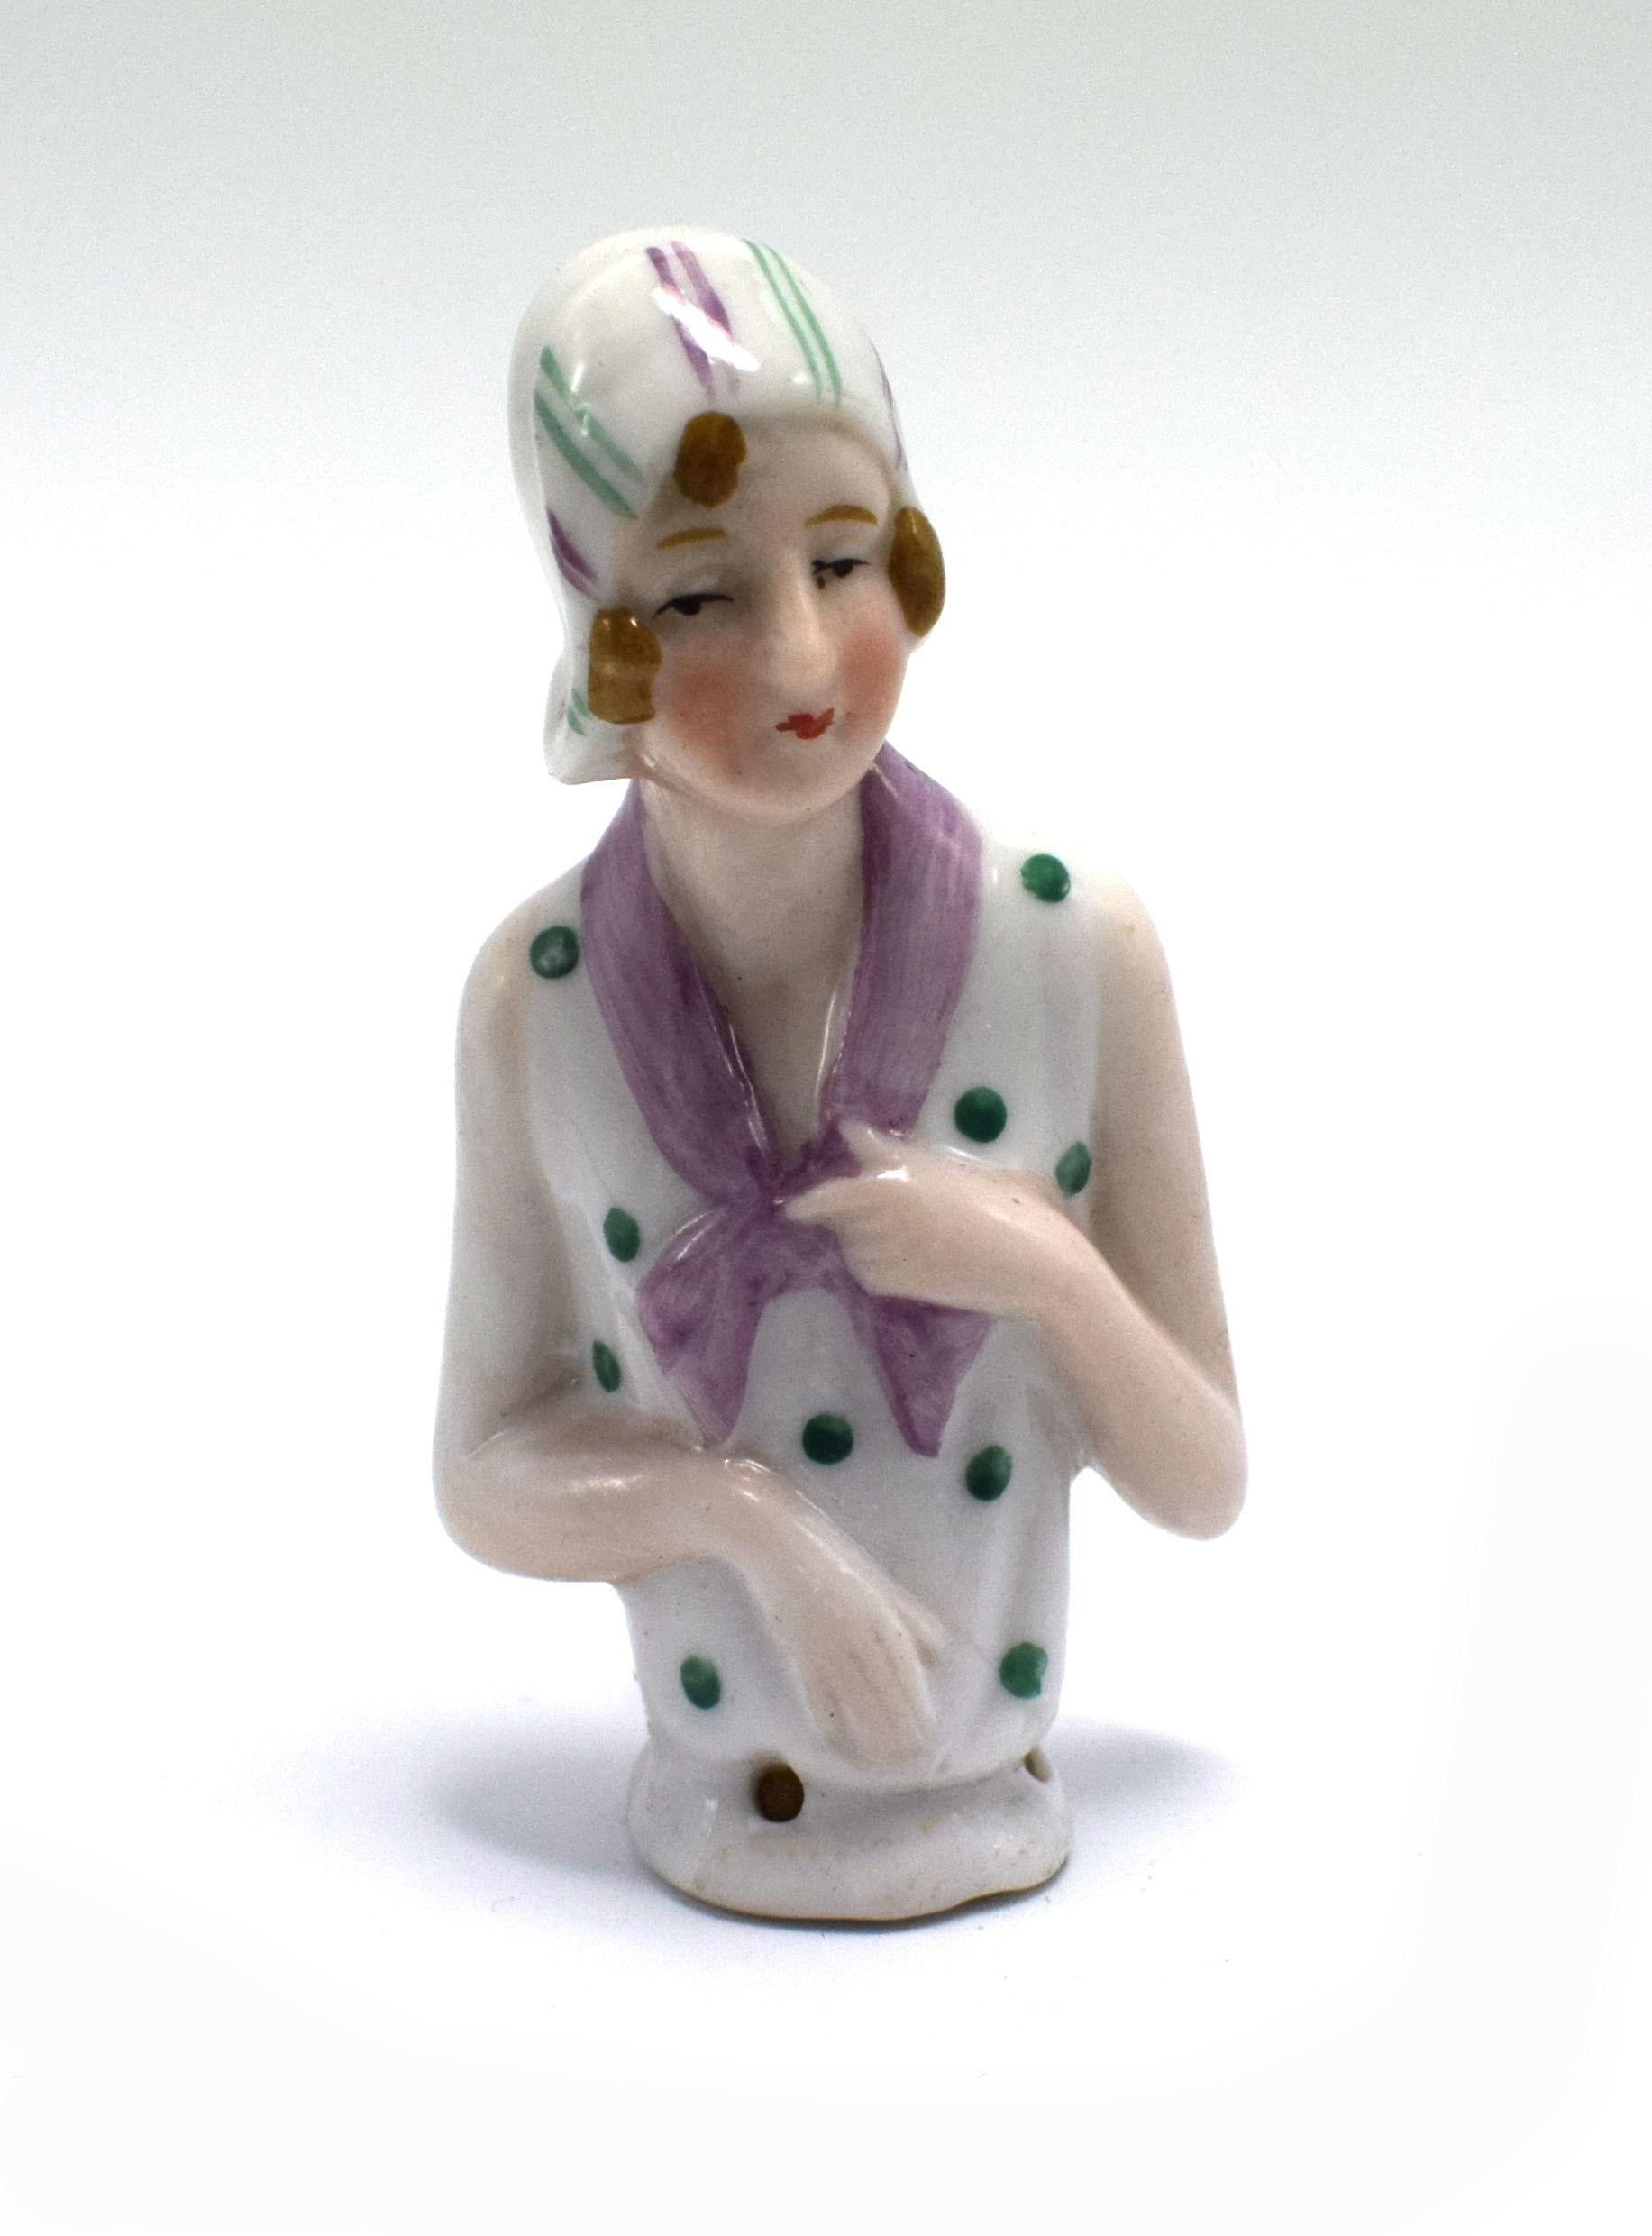 On offer and for your consideration is this charming and totally authentic late 1930s Art Deco German porcelain pin cushion half doll in the form of a pretty flapper girl with a cloche hat and bob hair cut. She's wearing a fashionable of the time